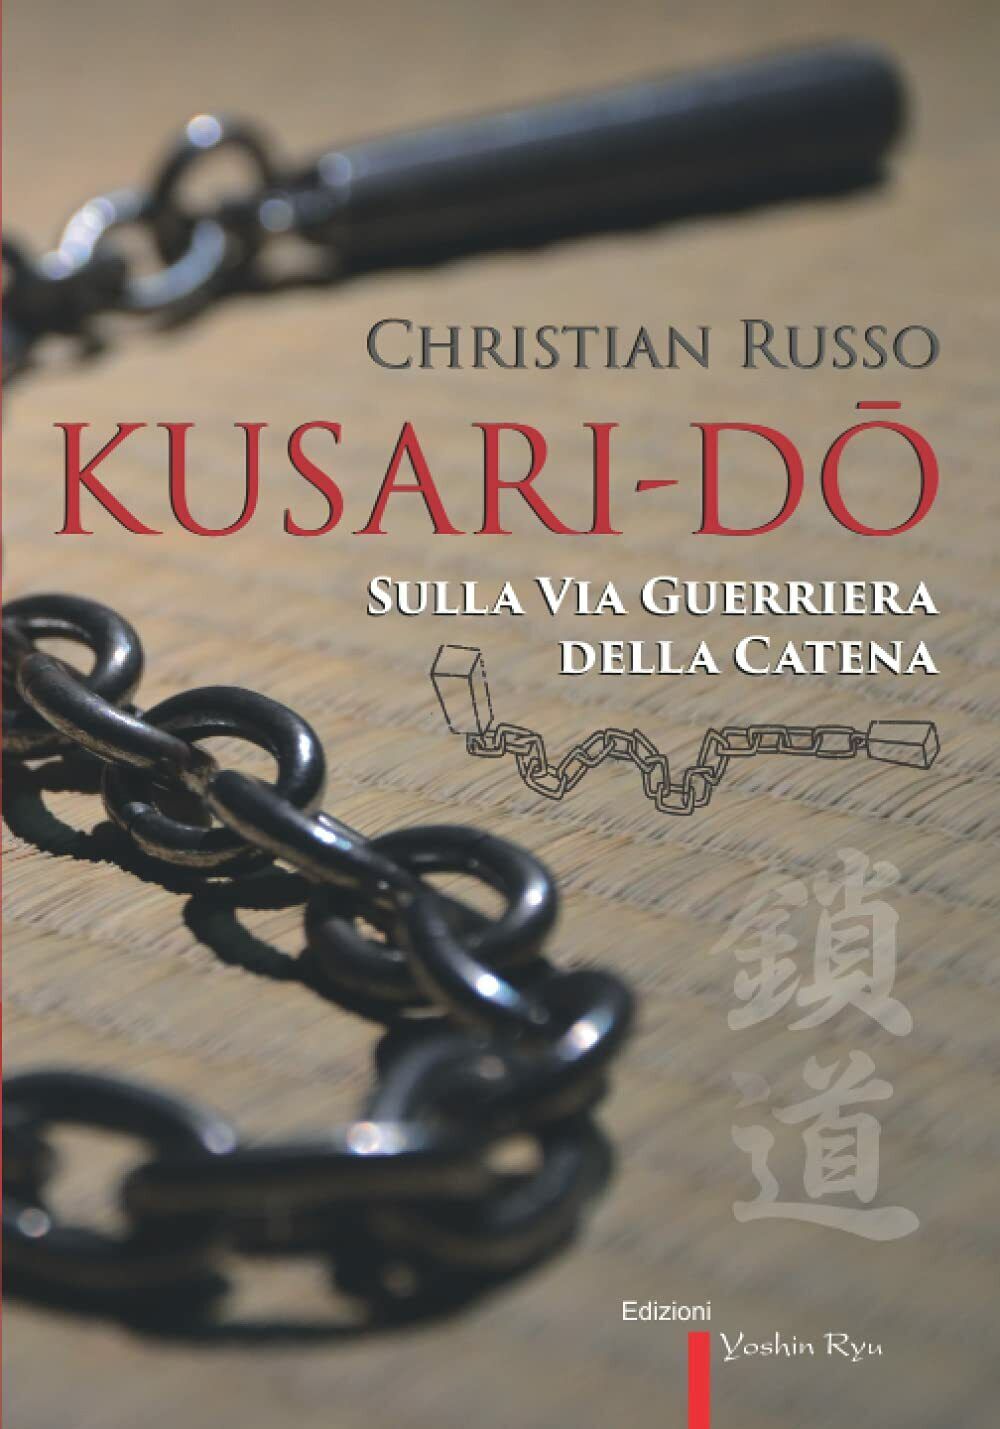 Kusari-d' - Christian Russo - Independently Published, 2021